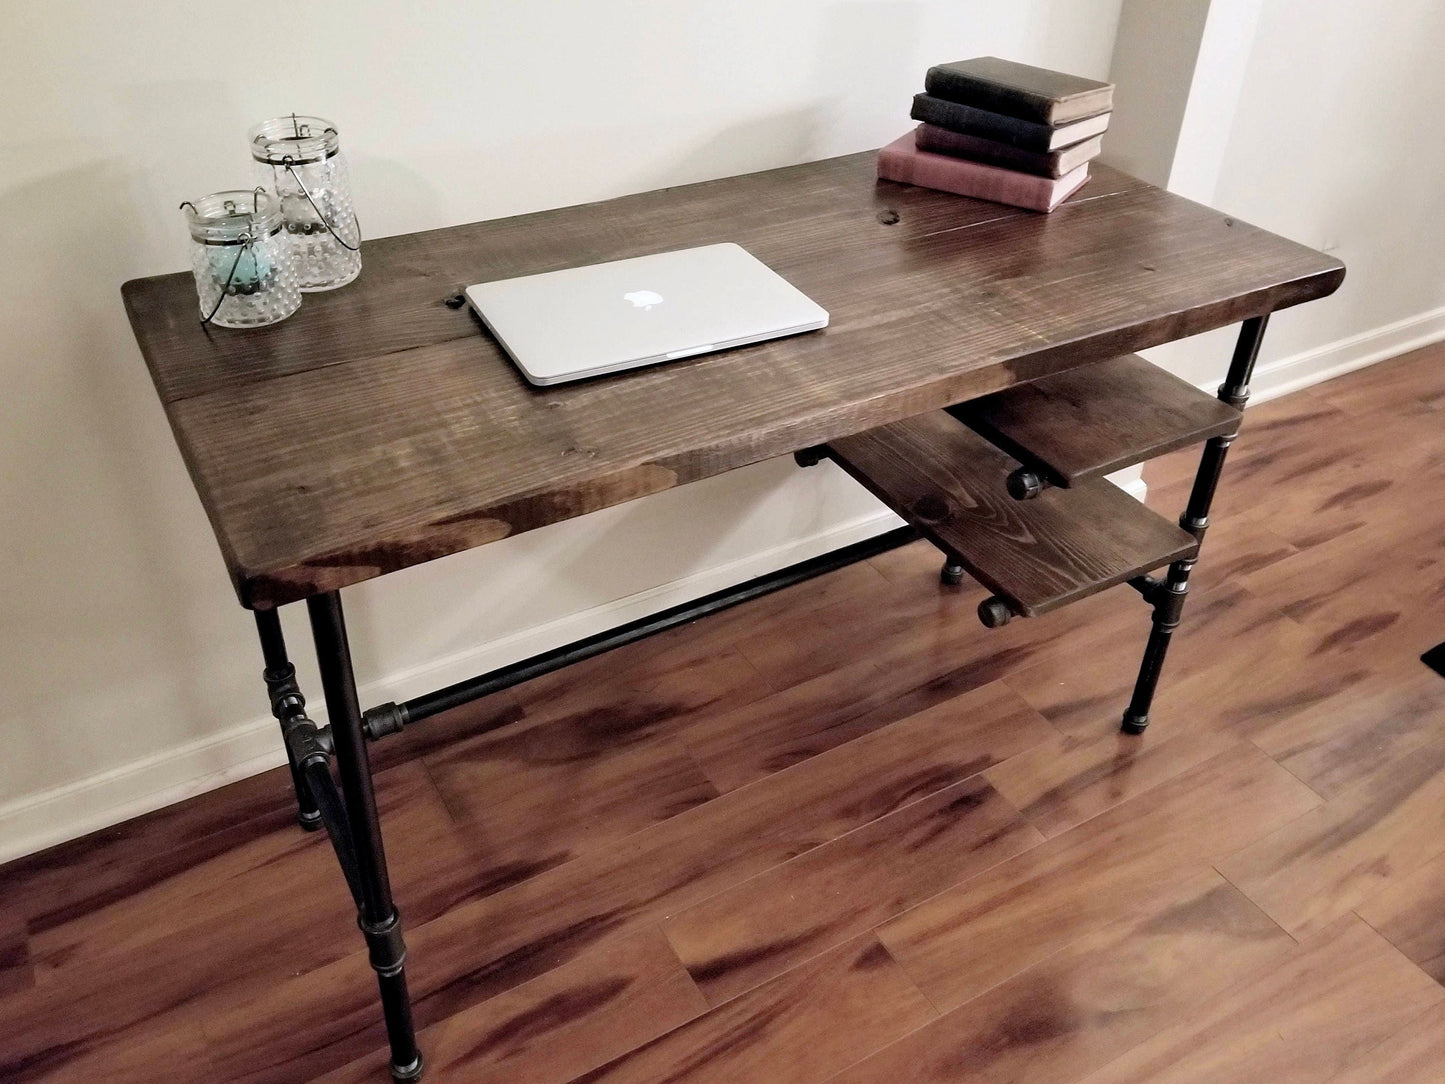 Steel and Wood Desk - Office Iron Pipe Desk with 2 Shelves